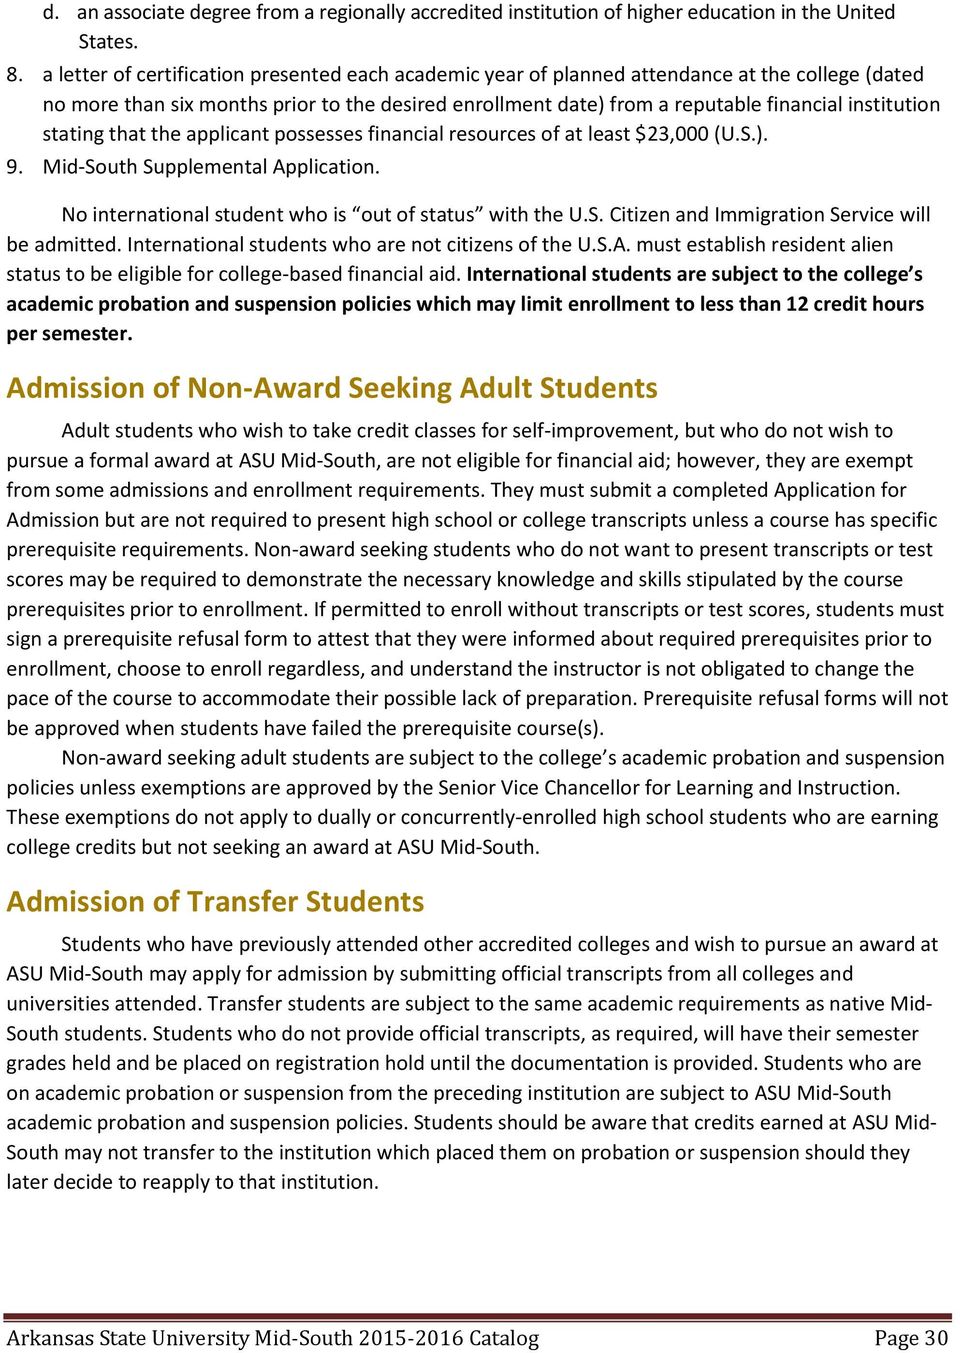 stating that the applicant possesses financial resources of at least $23,000 (U.S.). 9. Mid-South Supplemental Application. No international student who is out of status with the U.S. Citizen and Immigration Service will be admitted.